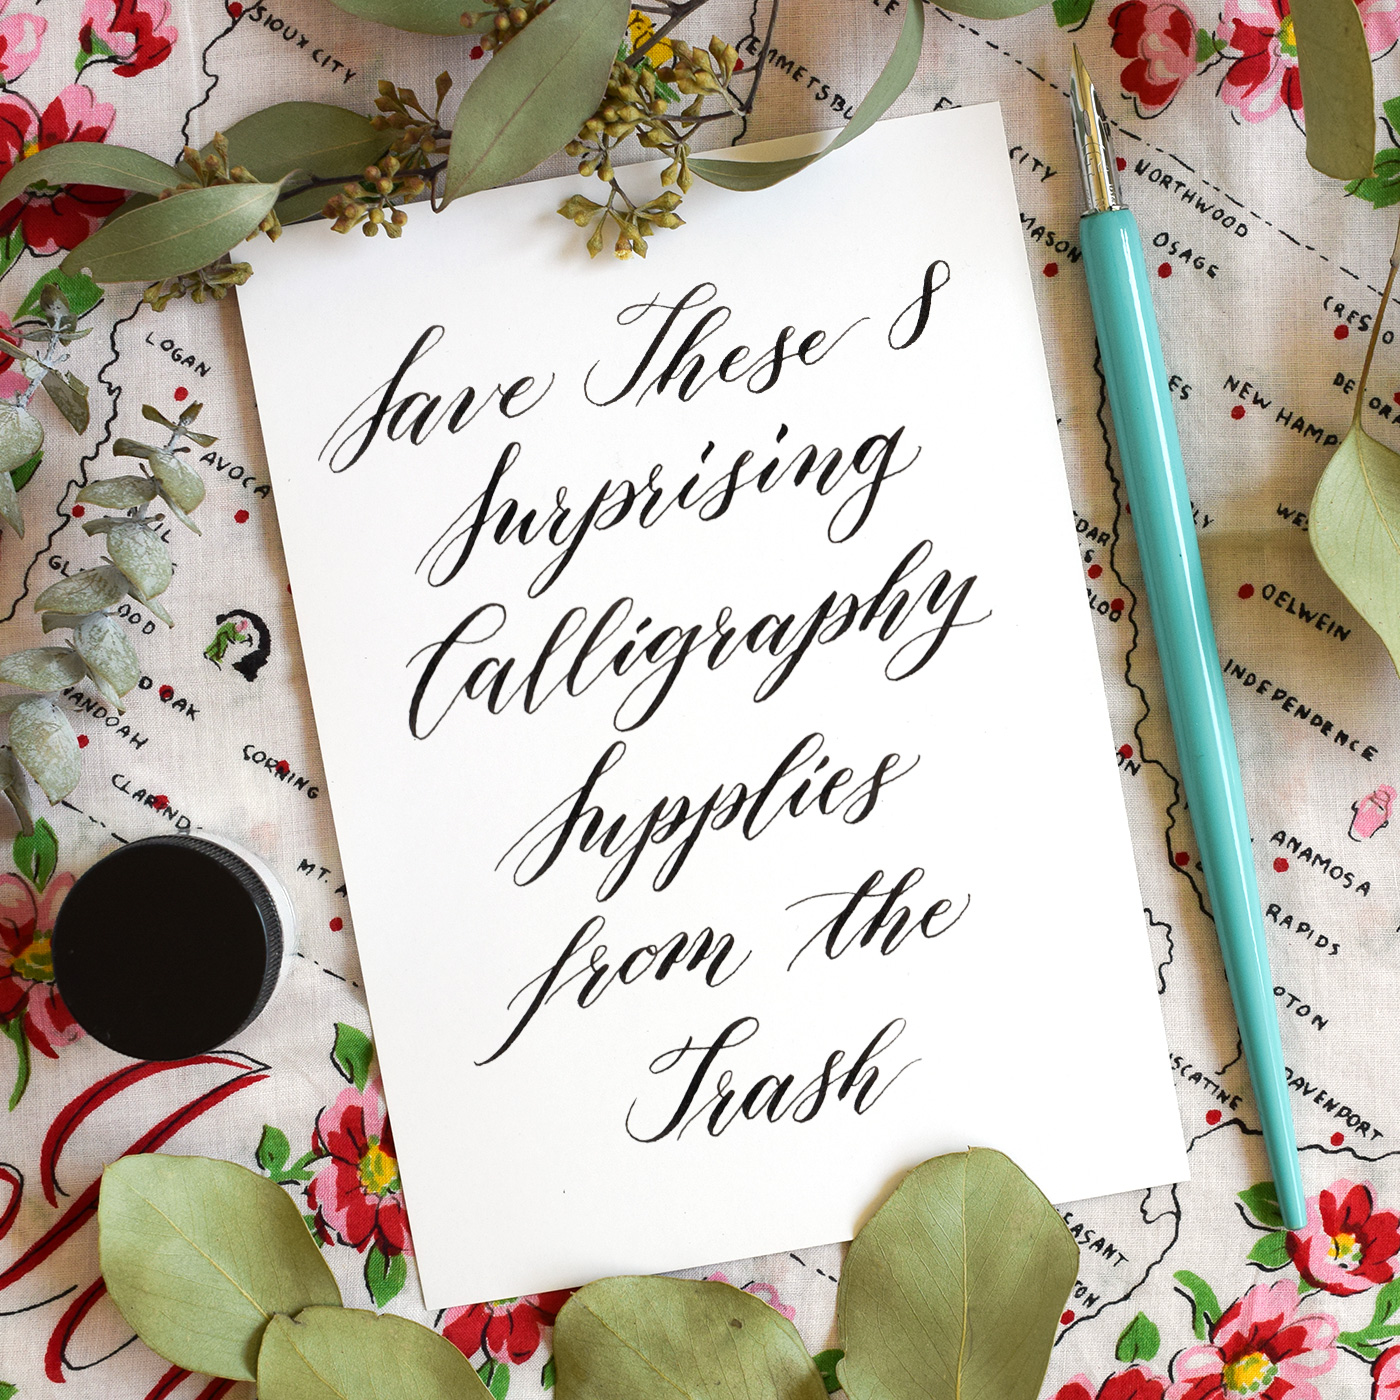 Save These 8 Surprising Calligraphy Supplies from the Trash